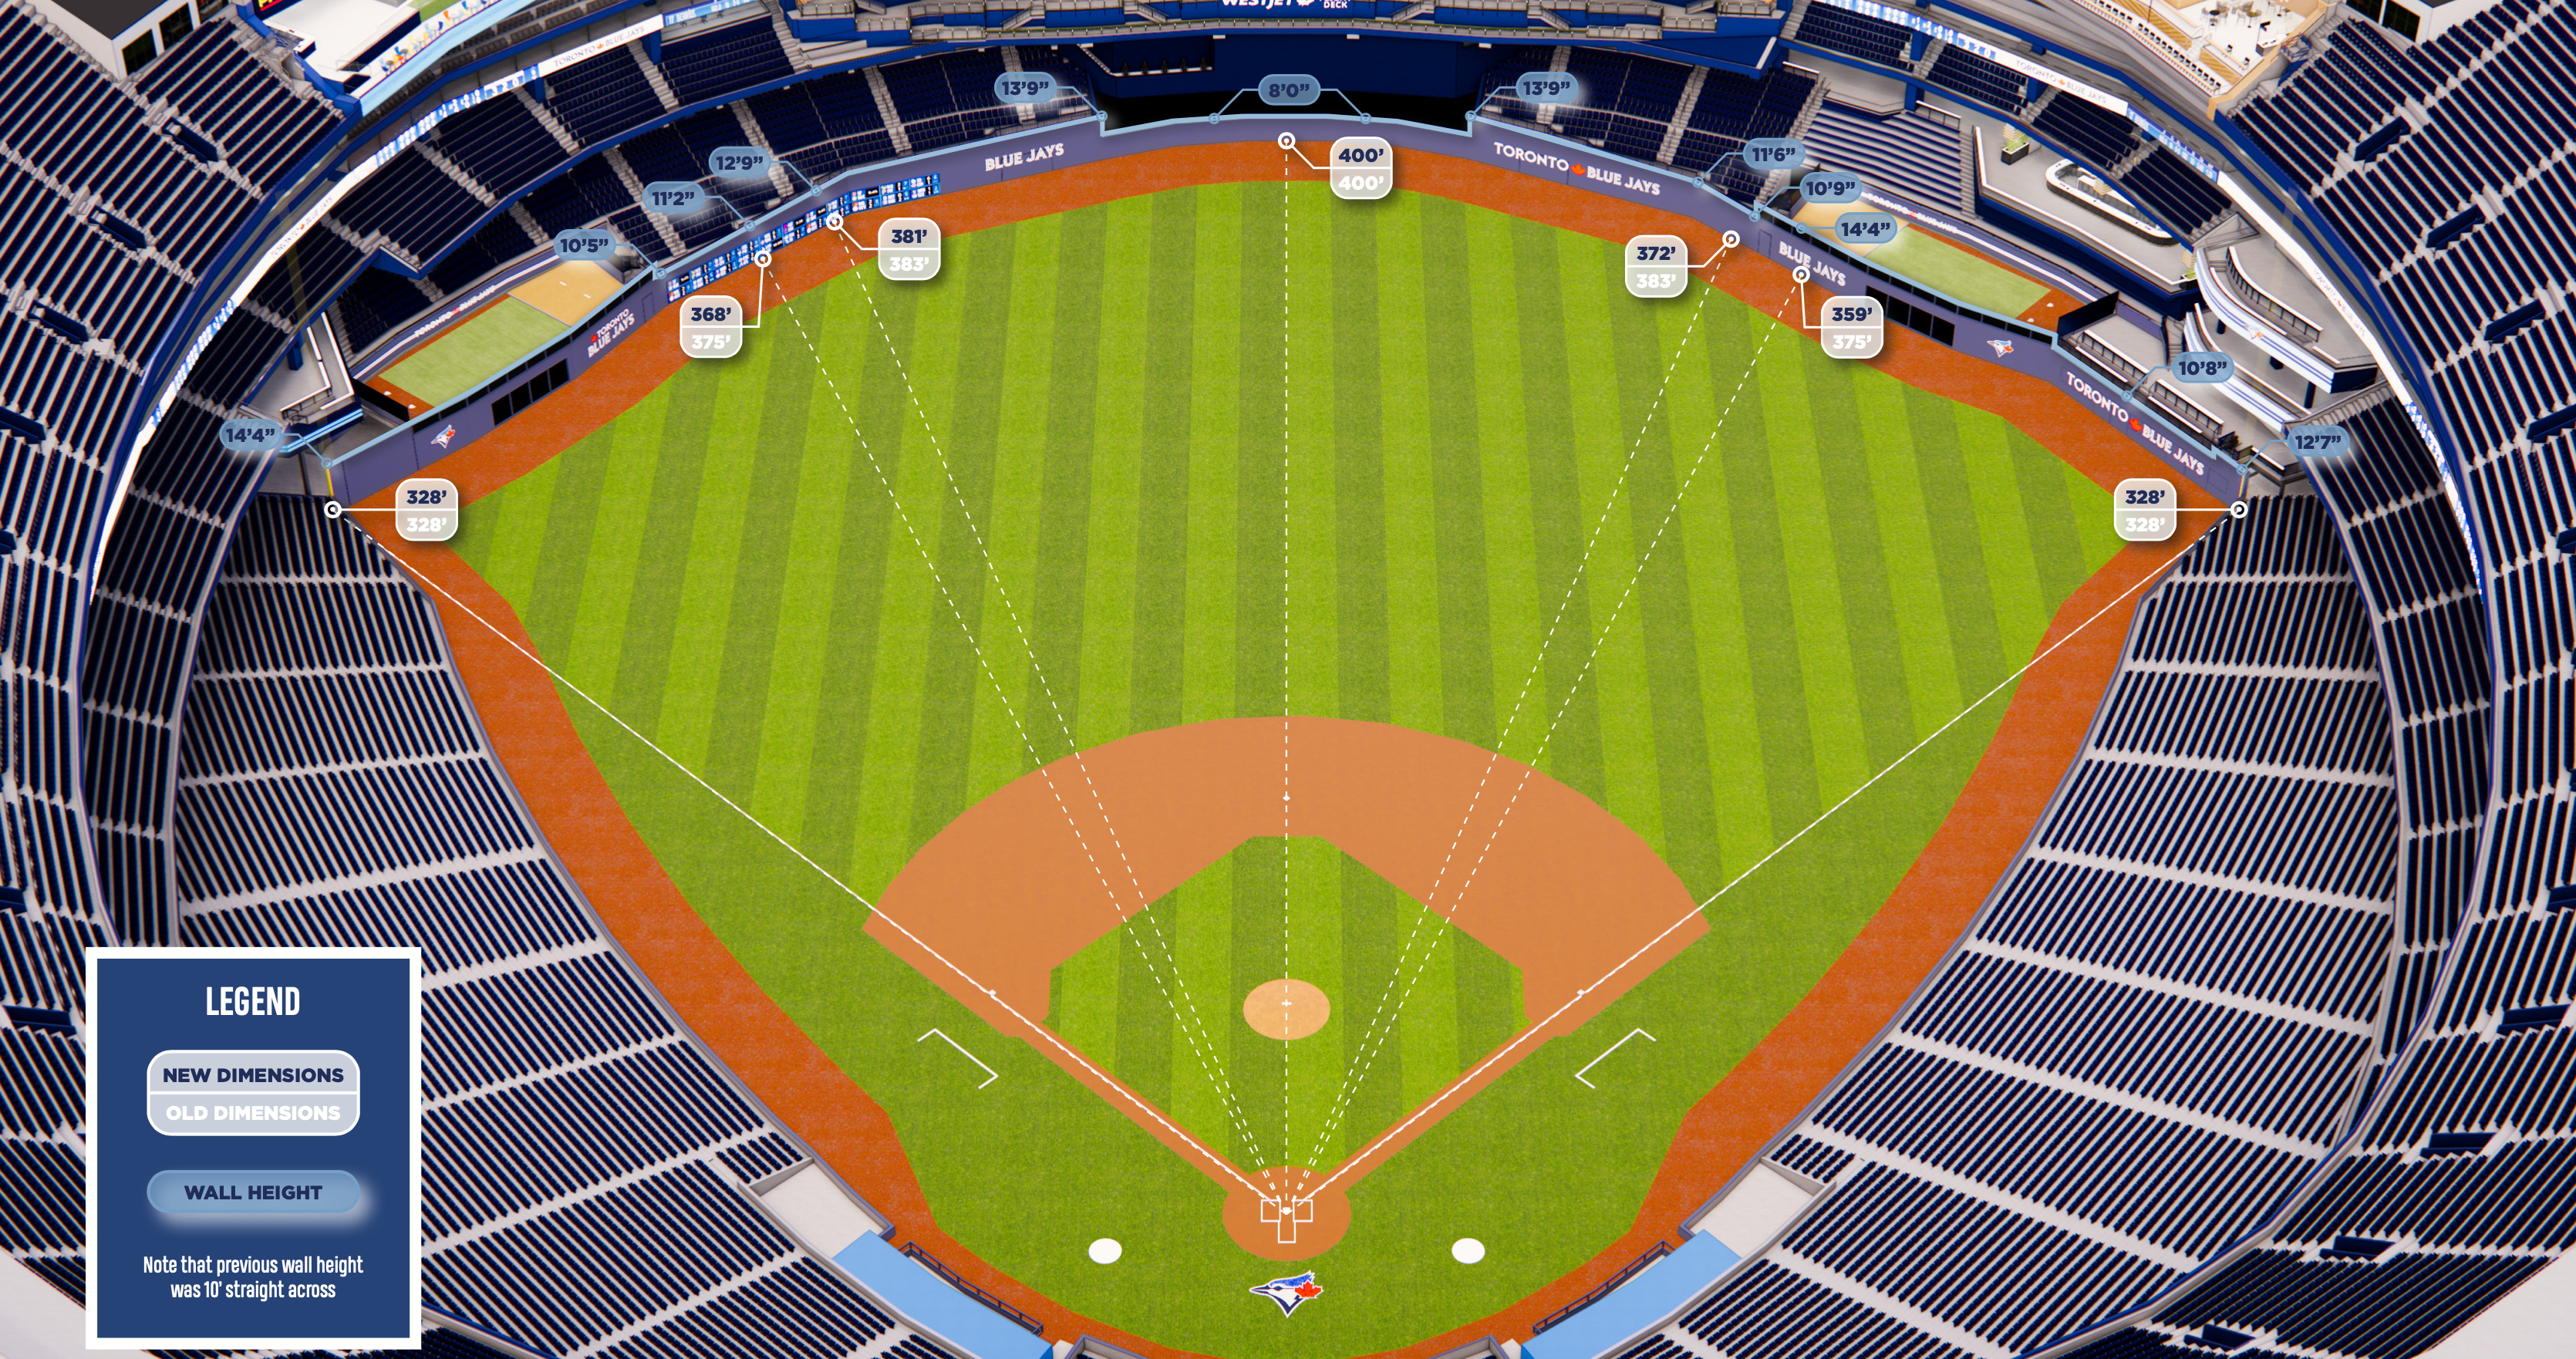 The Dome Effect: Does an Open or Closed Roof Impact Home Run